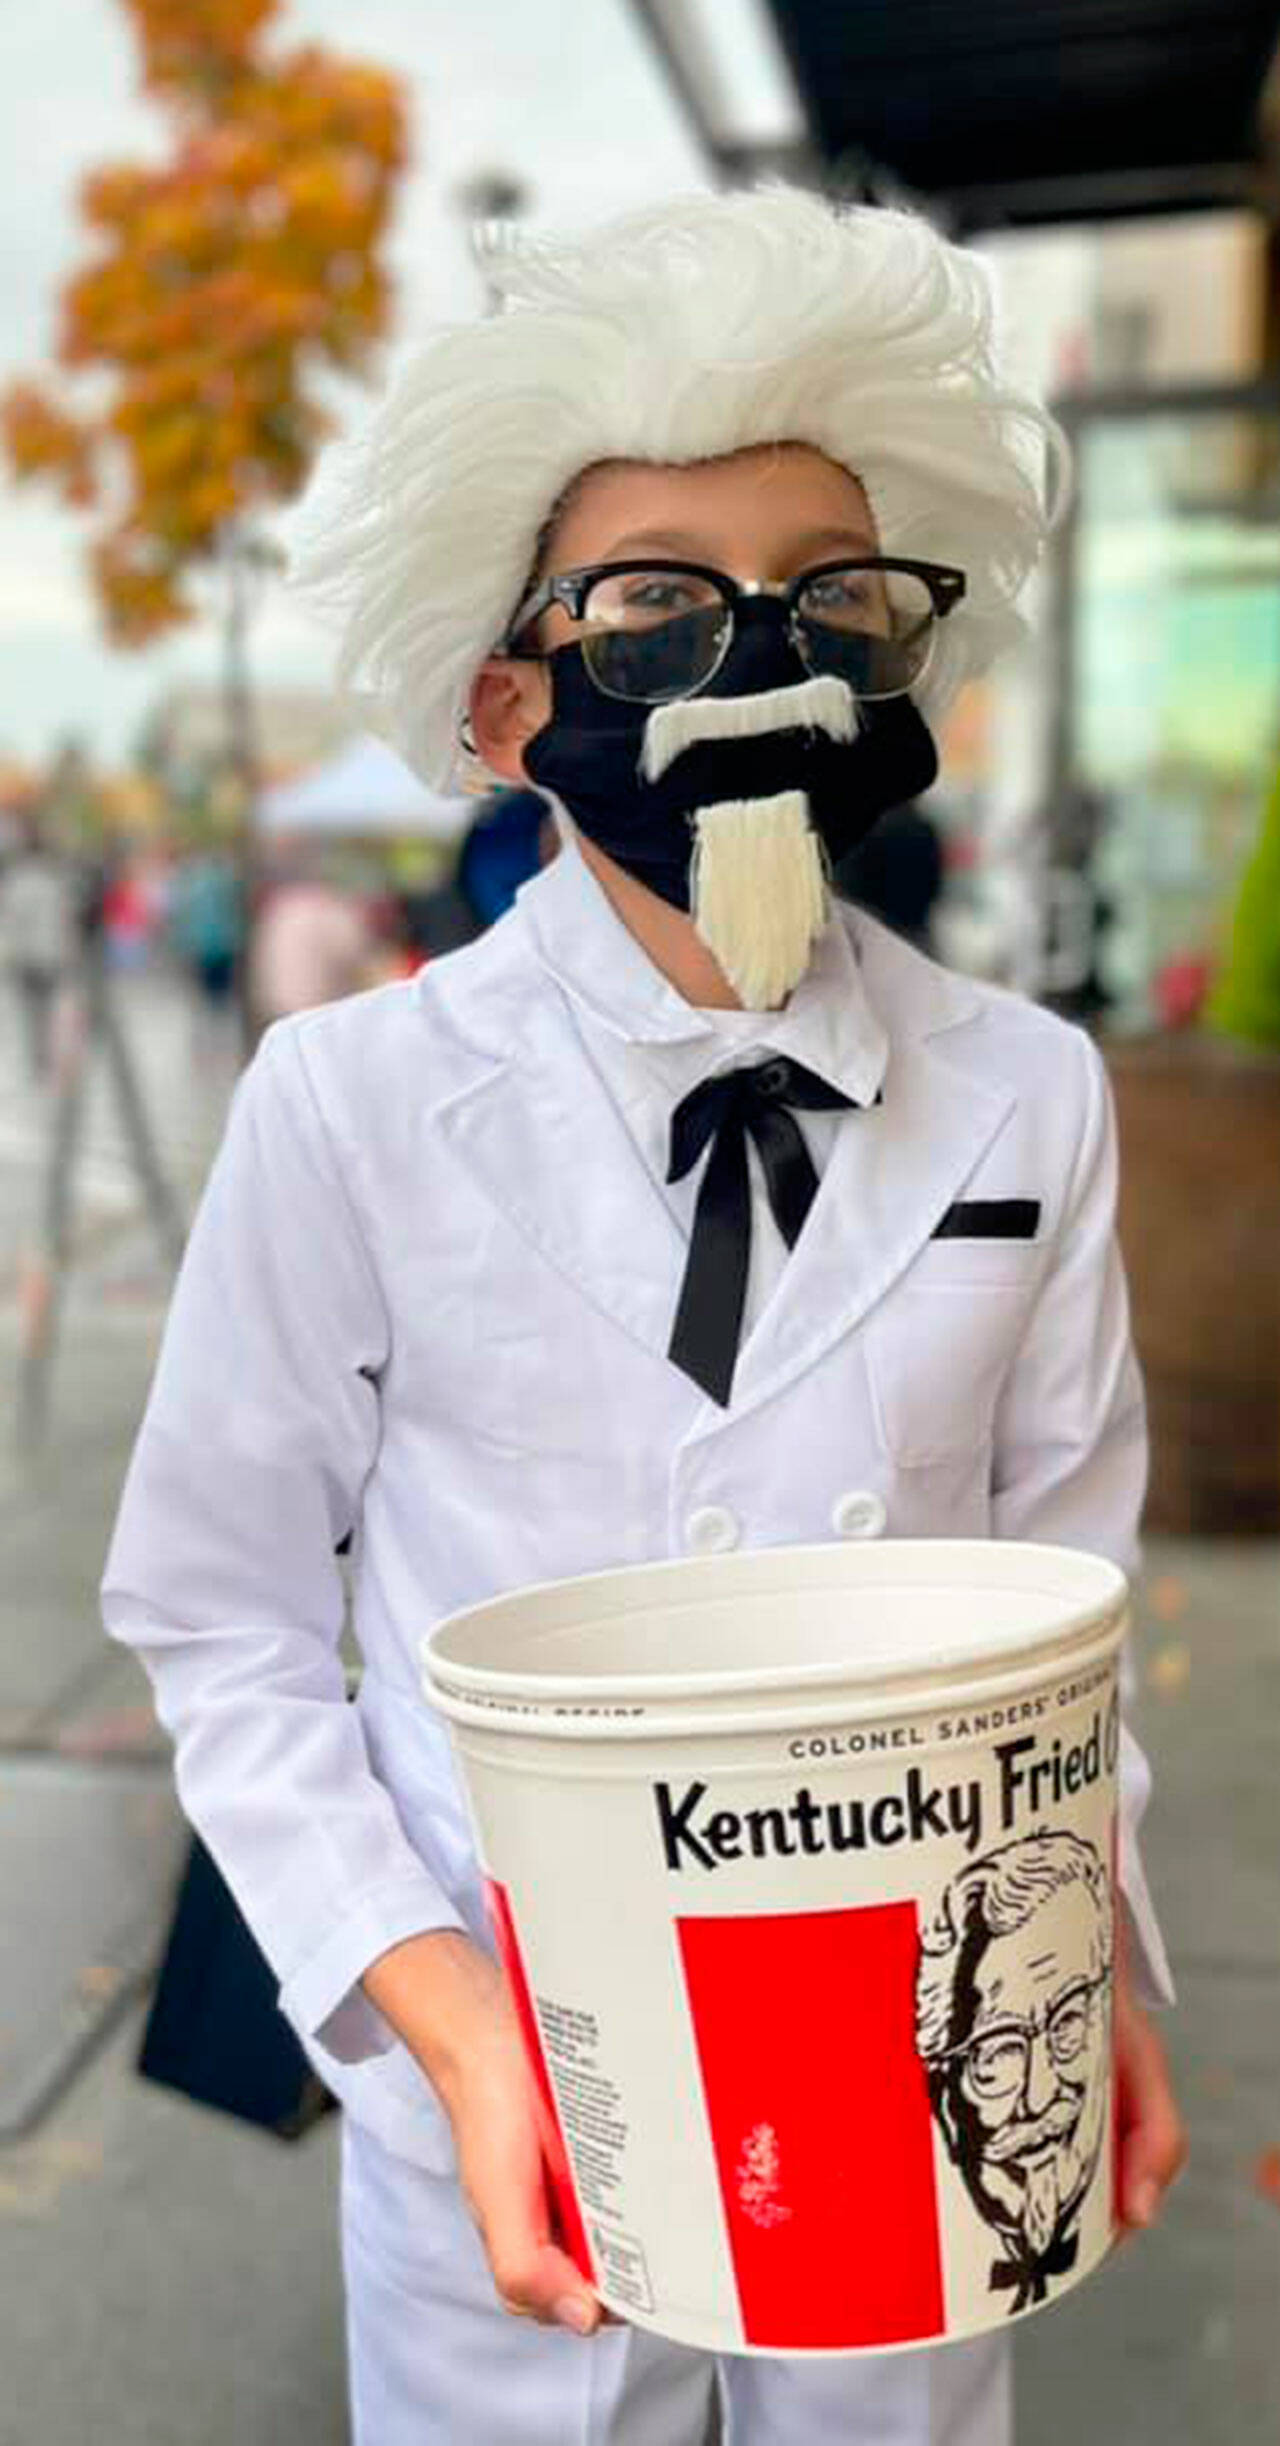 It appears Colonel Sanders is going for candy rather than chicken Oct. 24 at the Haunted Boo-Levard at Kent Station. COURTESY PHOTO, Kent Station